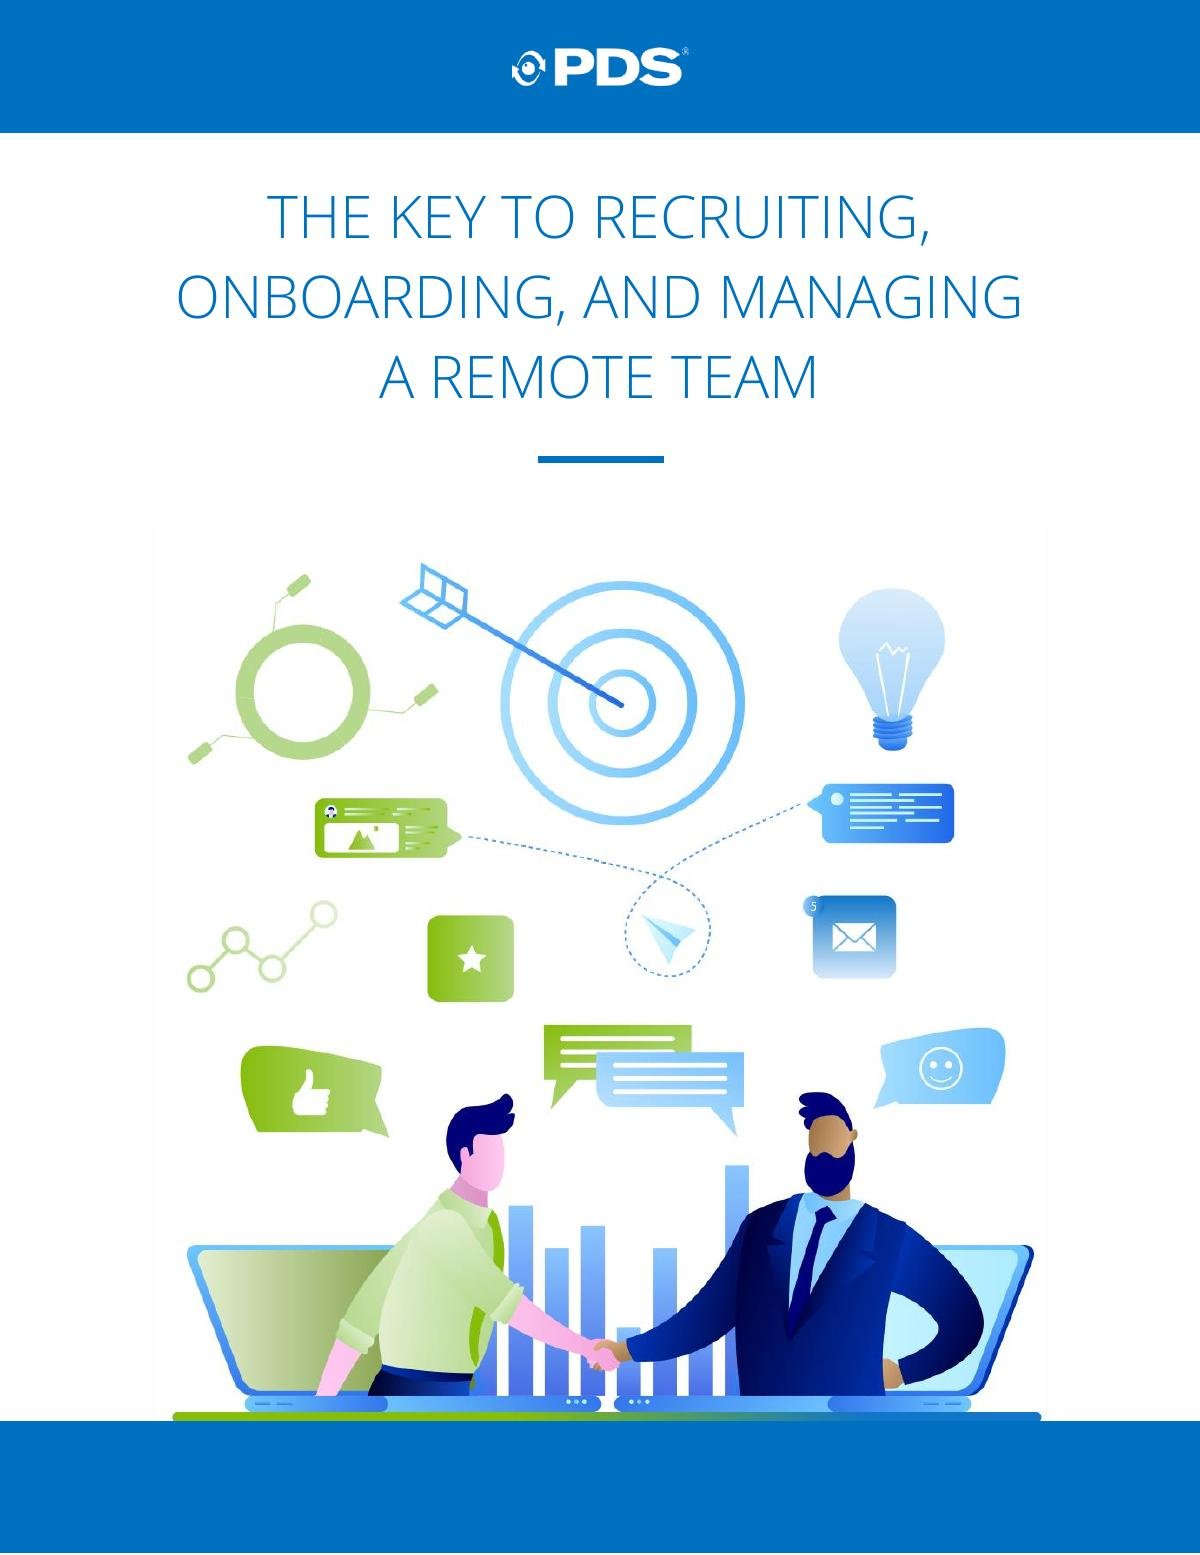 The Key to Recruiting, Onboarding and Managing a Remote Team